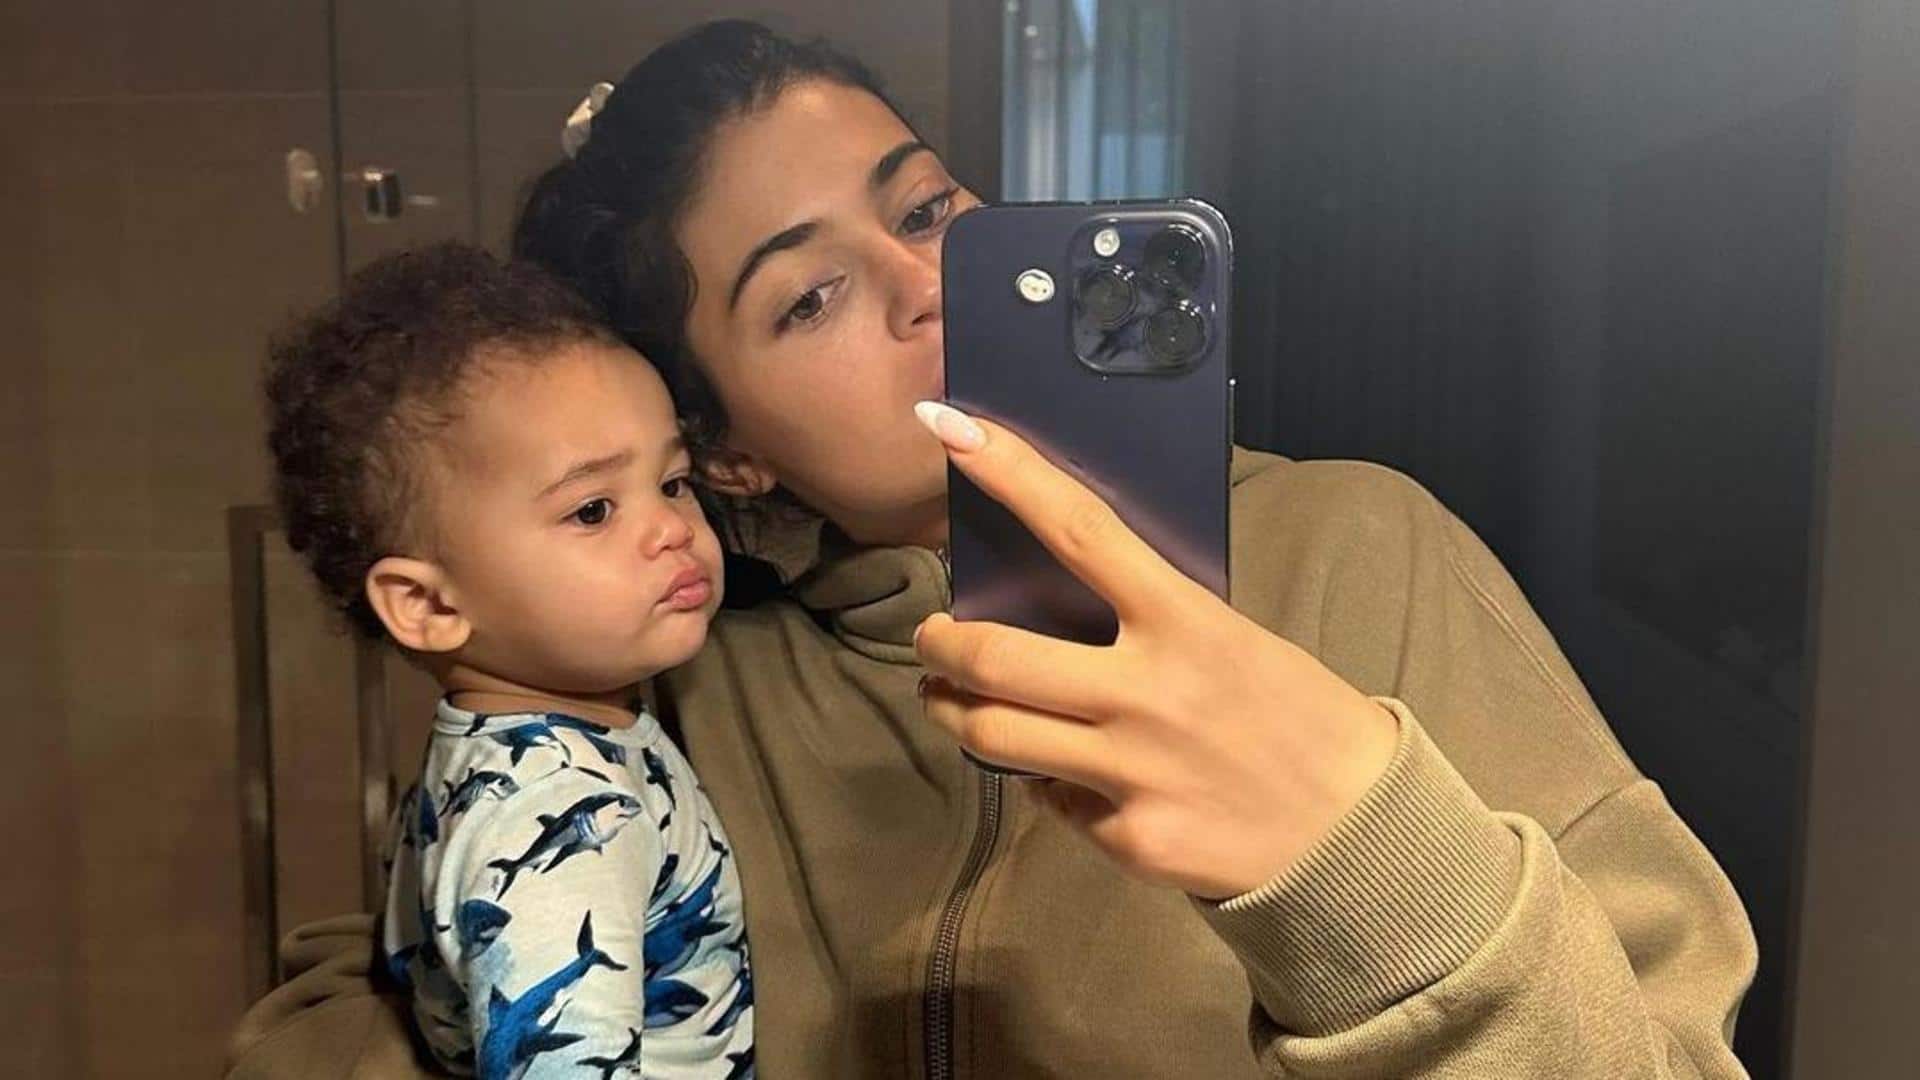 Kylie Jenner reveals son's new name, shares first photos